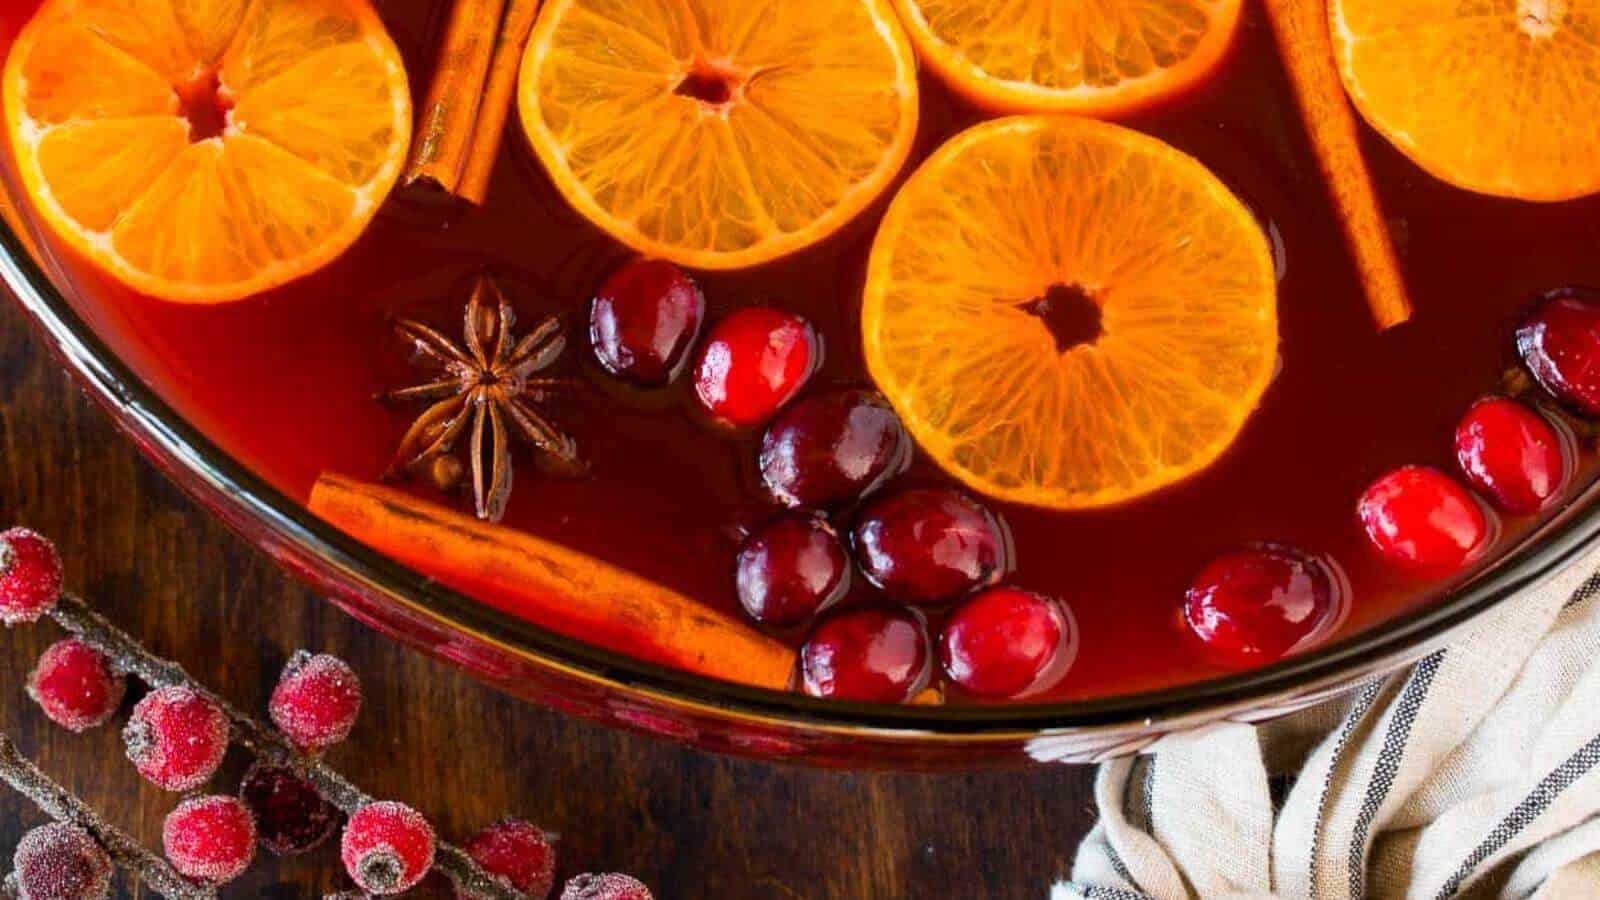 Kinderpunsch in a serving bowl with orange slices, cranberries, cinnamon sticks and star anise.